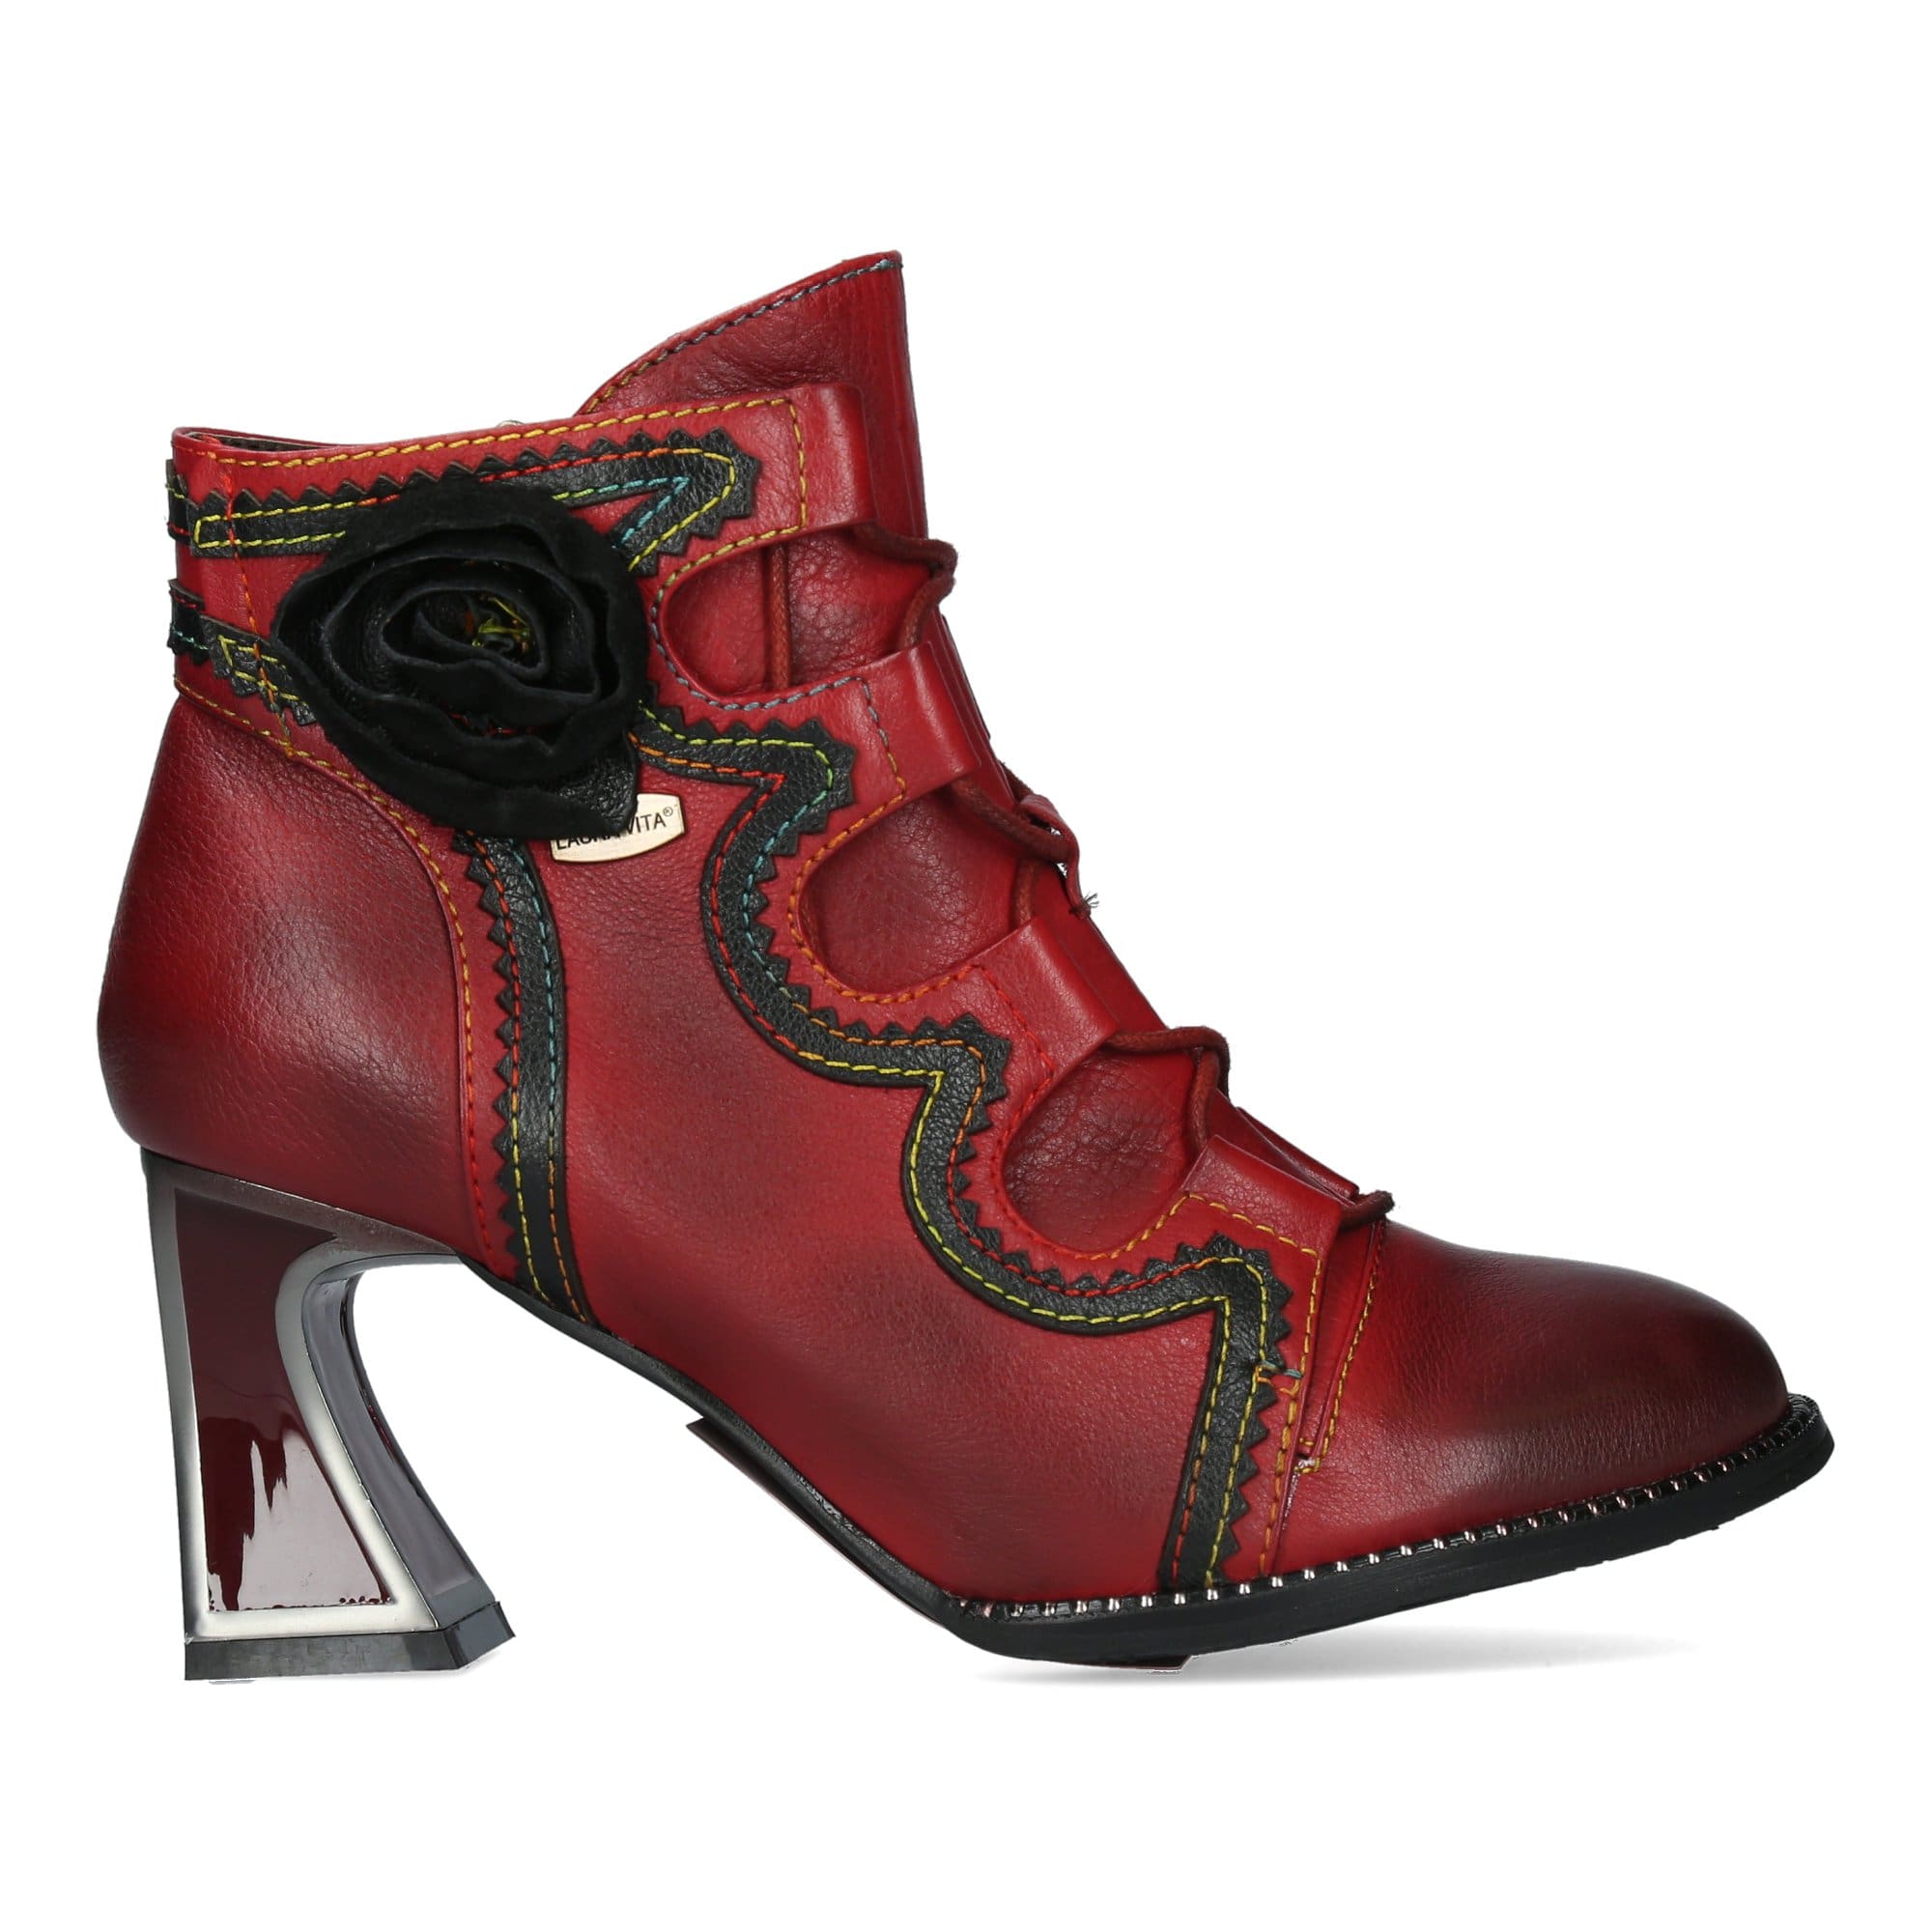 JACBO 213 - 35 / Red - Boots